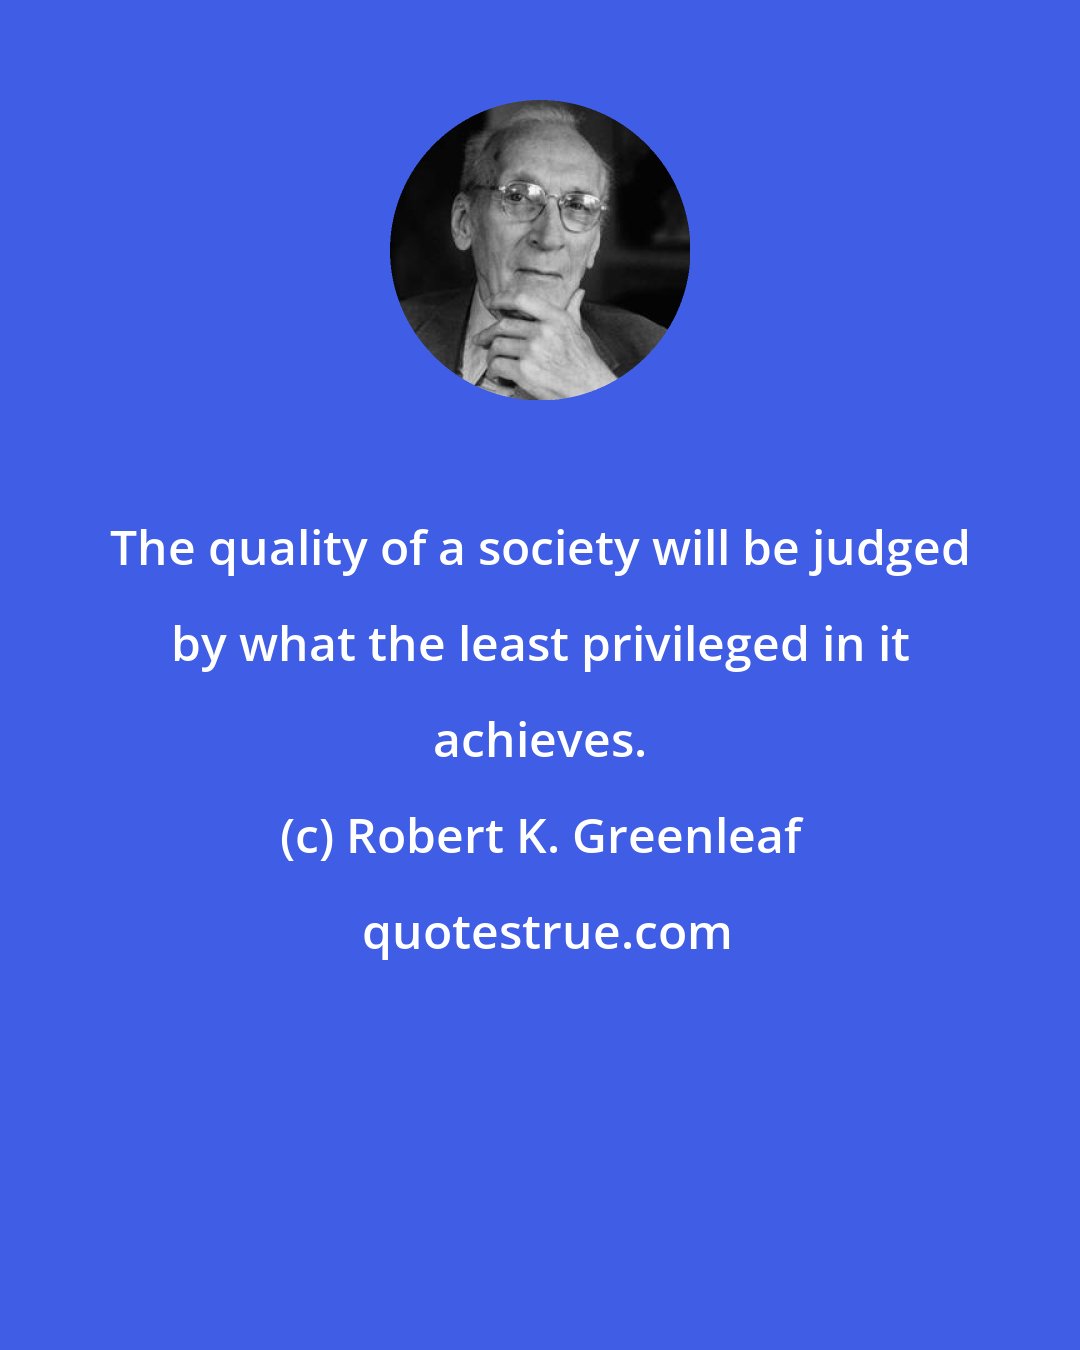 Robert K. Greenleaf: The quality of a society will be judged by what the least privileged in it achieves.